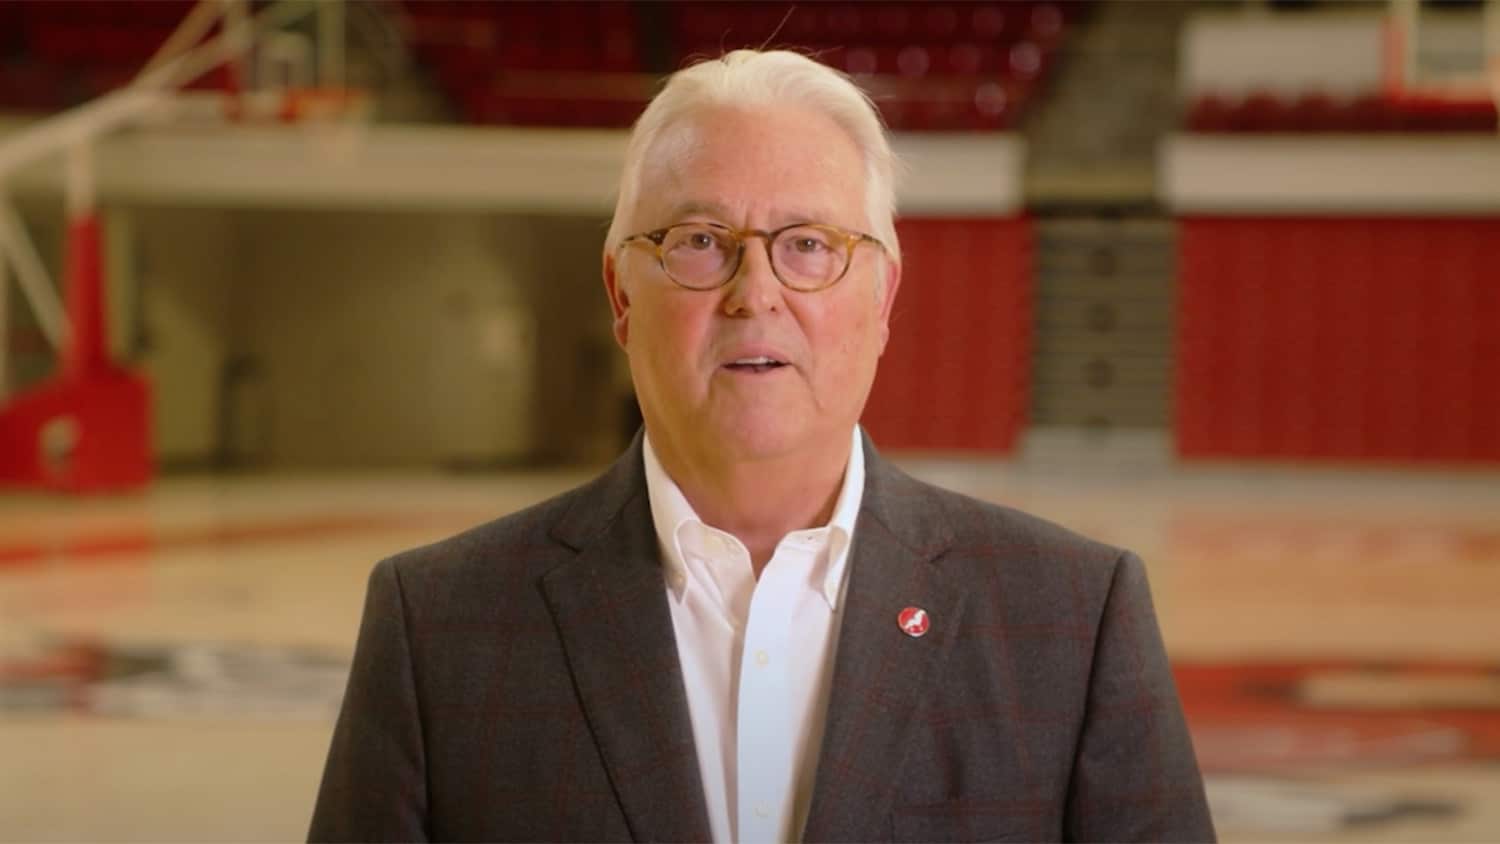 Chancellor Randy Woodson shares a message with the NC State community celebrating recent Wolfpack wins and highlighting the campus resources available to help our community complete another successful semester. 